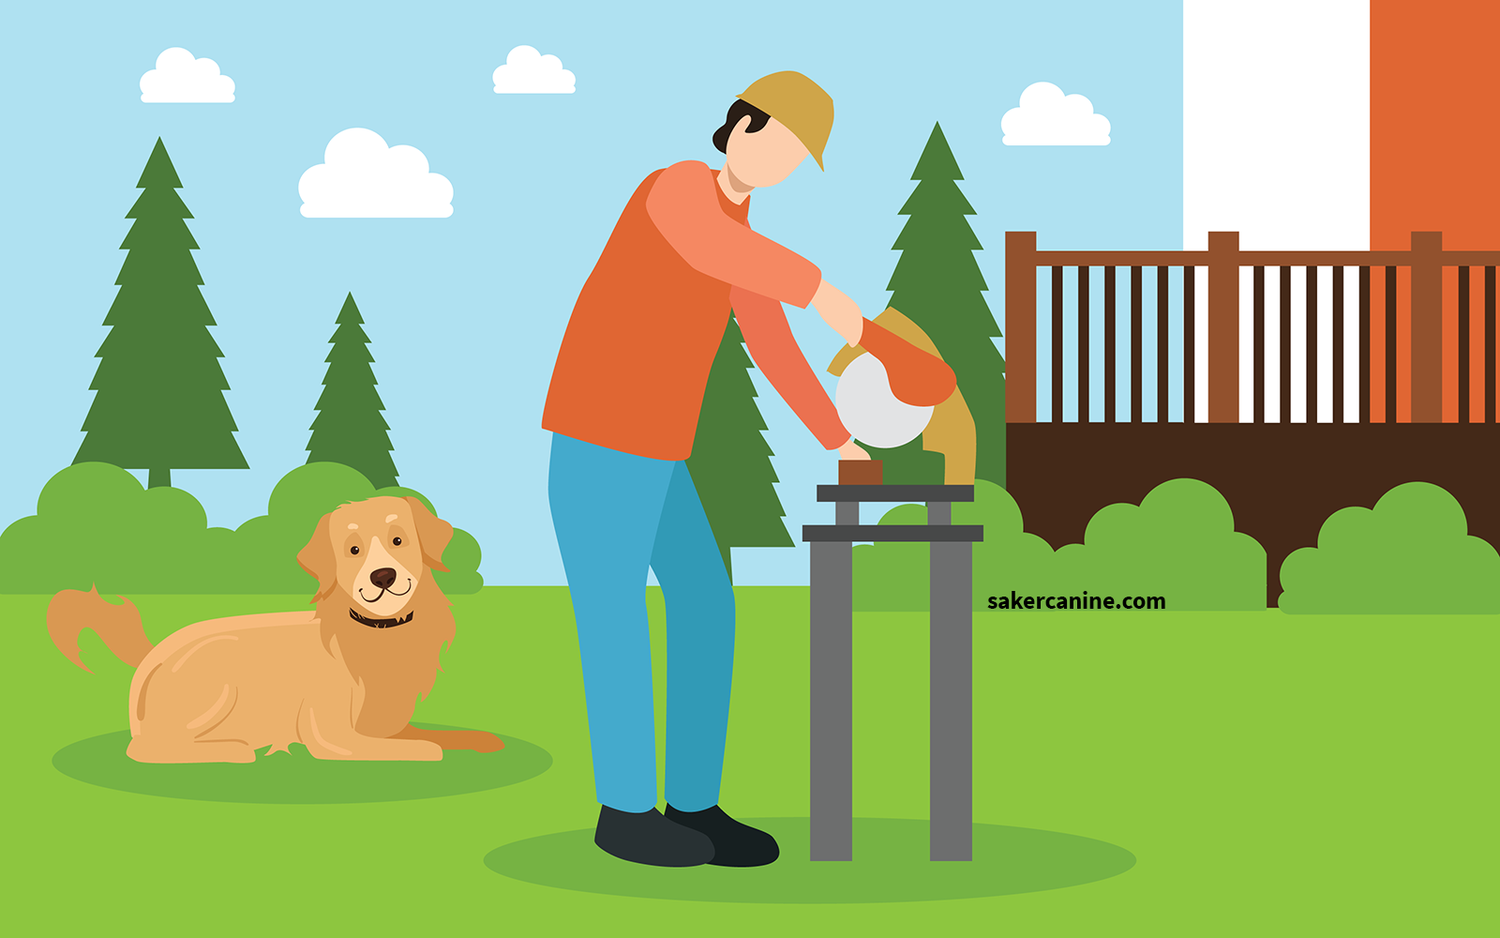 illustration of a man making a dog tie out